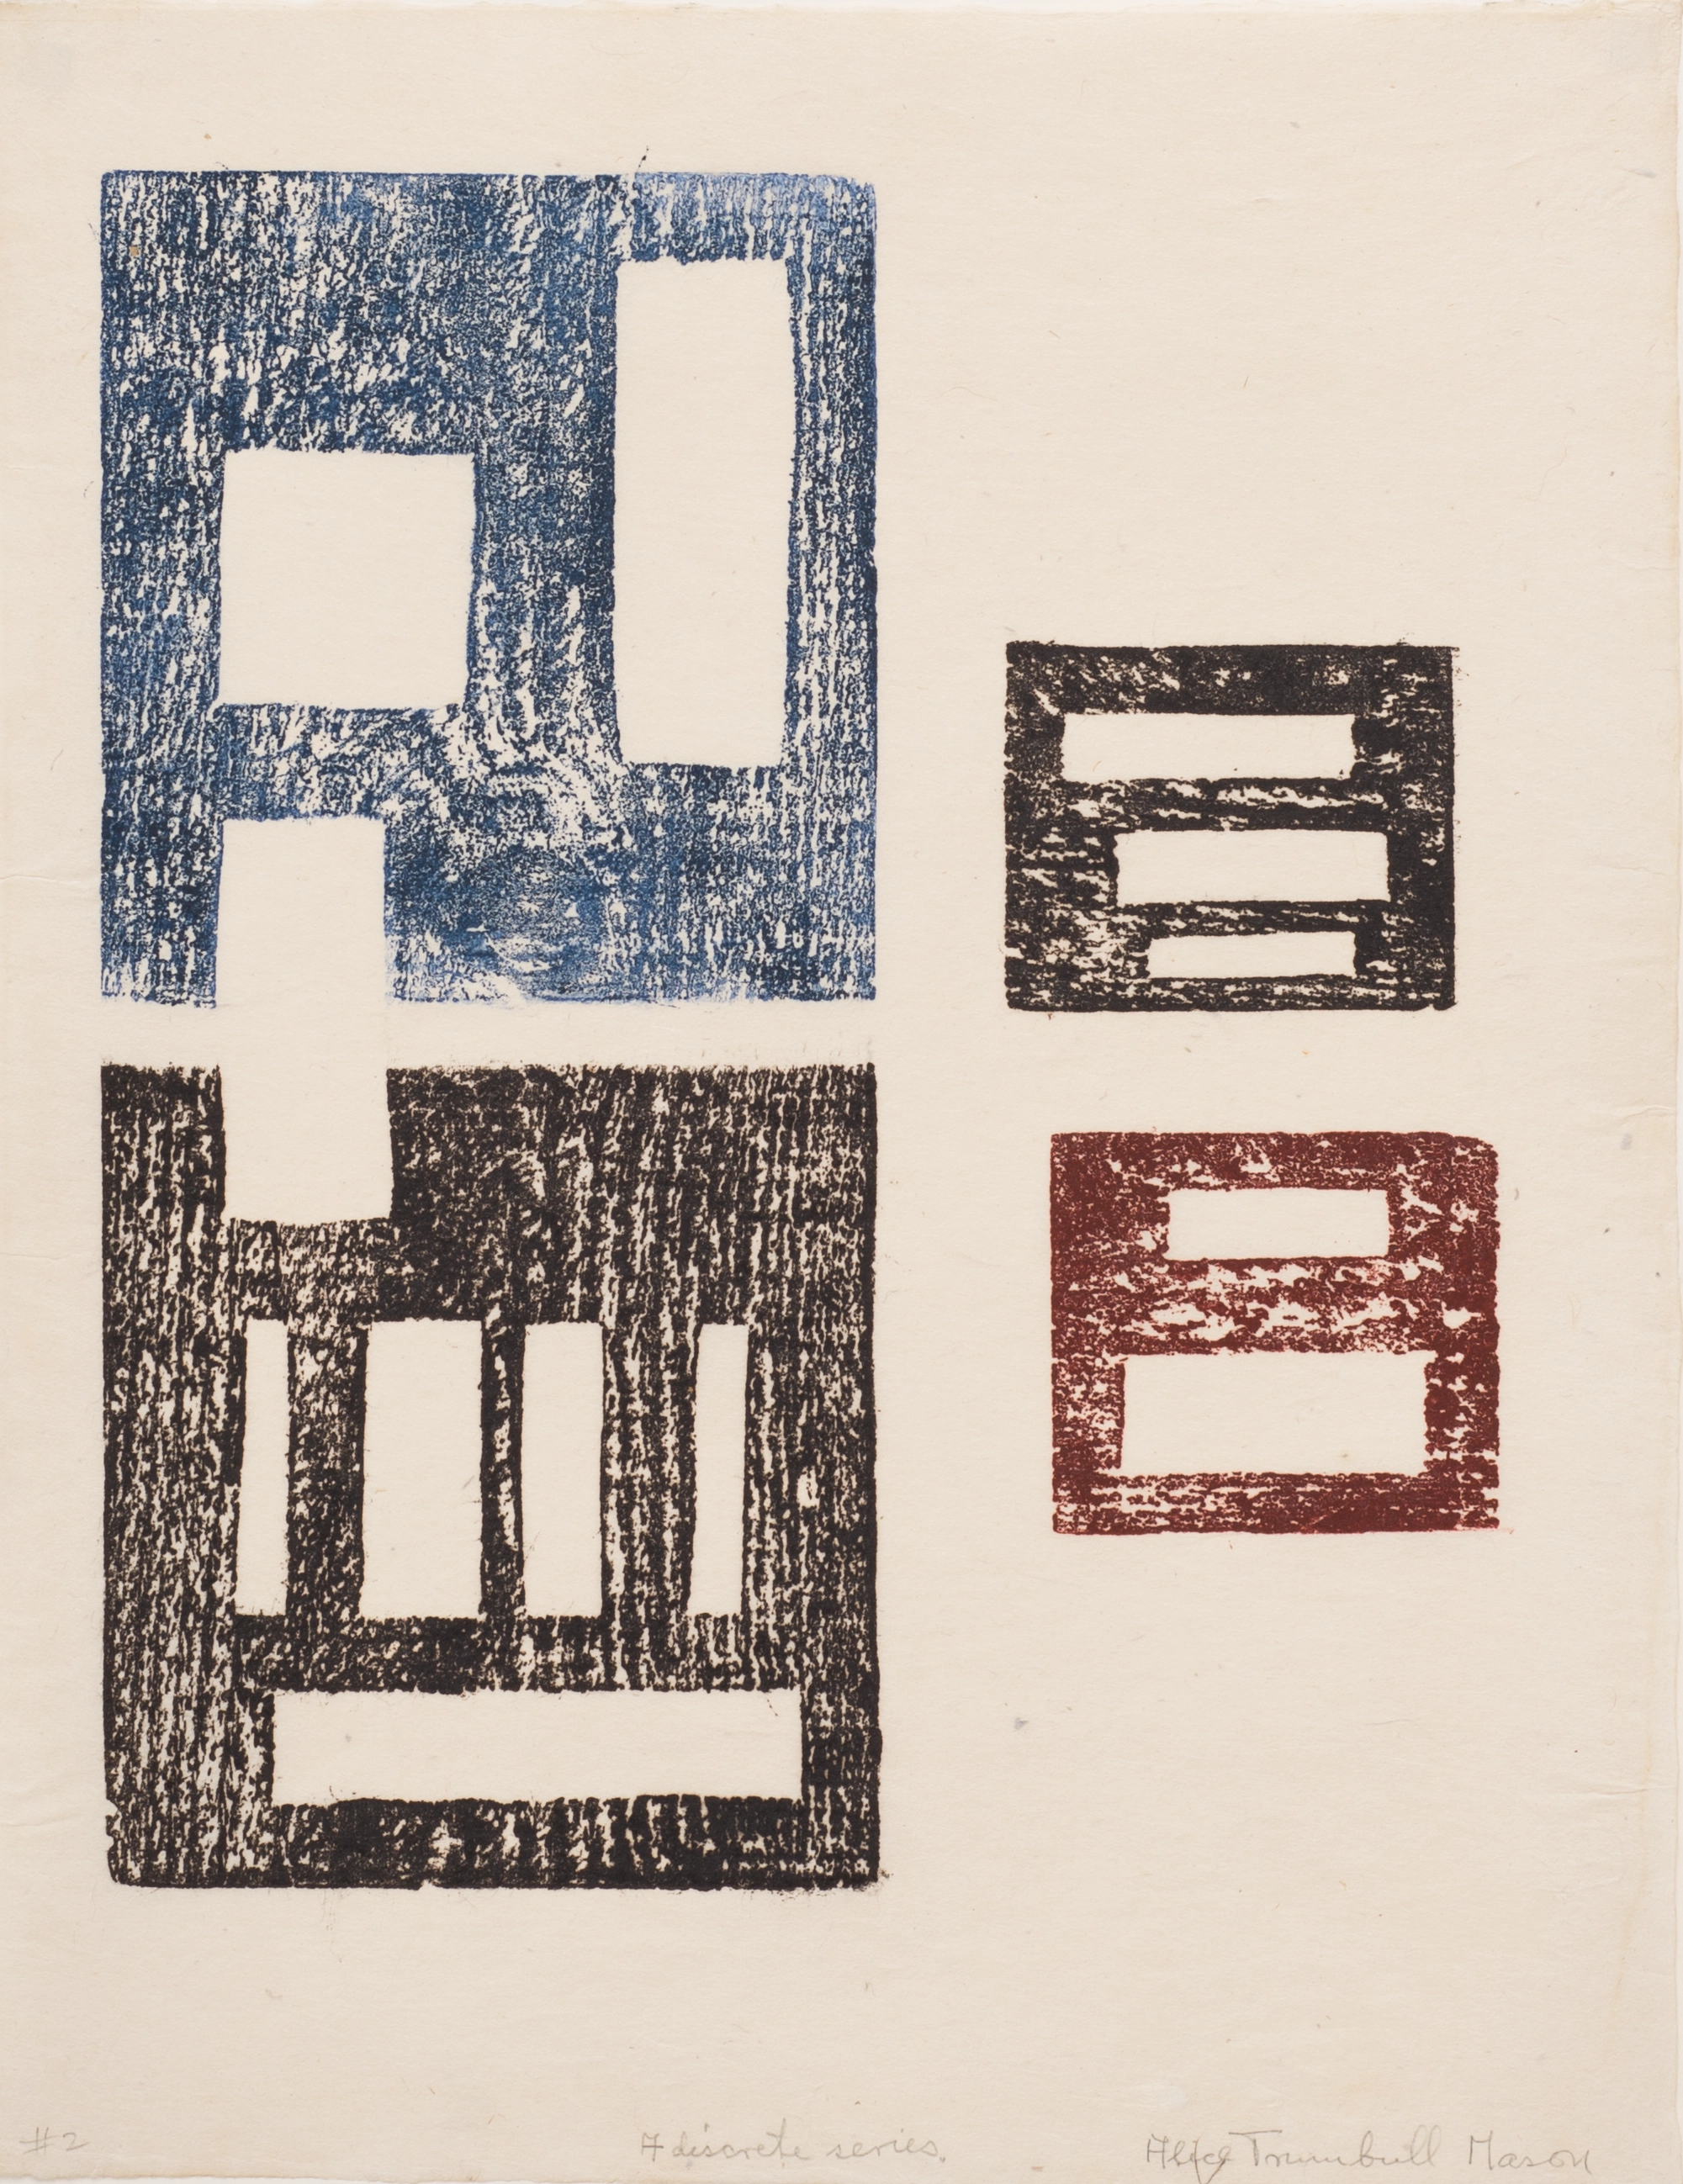 Abstract print on paper of four squares, two larger, blue and brown on the left, and two smaller, brown and red on the right. Each square has smaller, white rectangles inside of it.